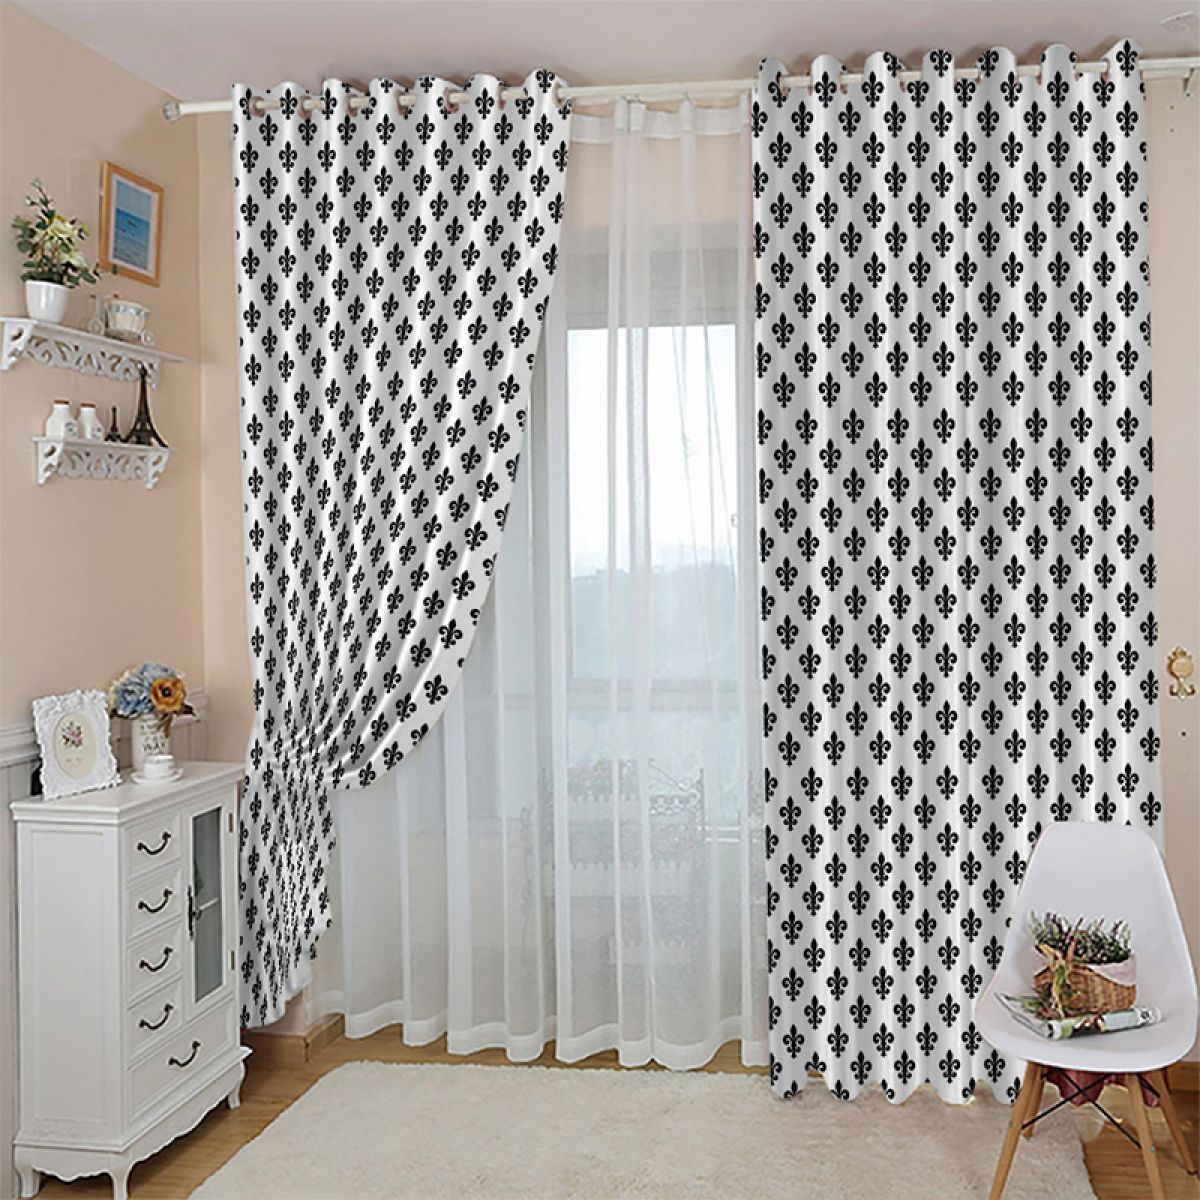 Iron Flower Patterns Black And White Printed Window Curtain Home Decor